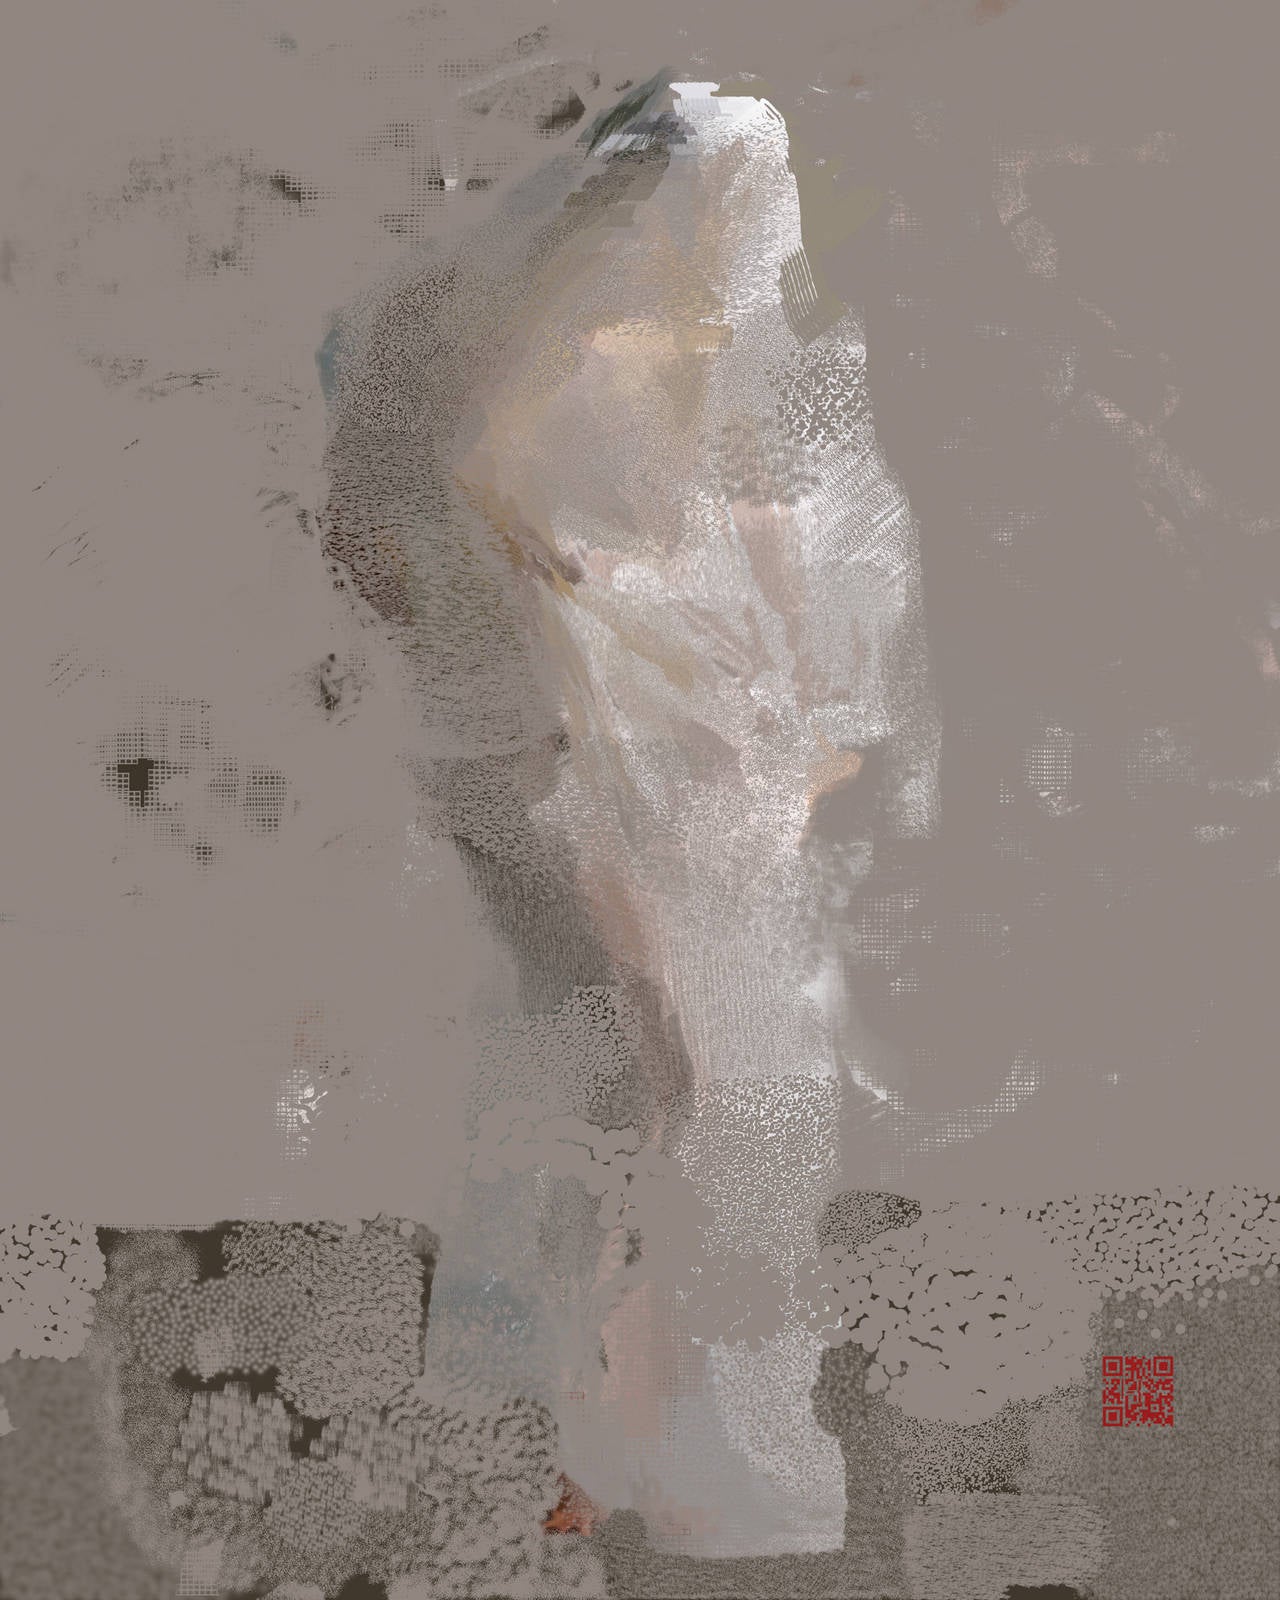 Classical Shroud, digital painting, abstracted figure, earth tones